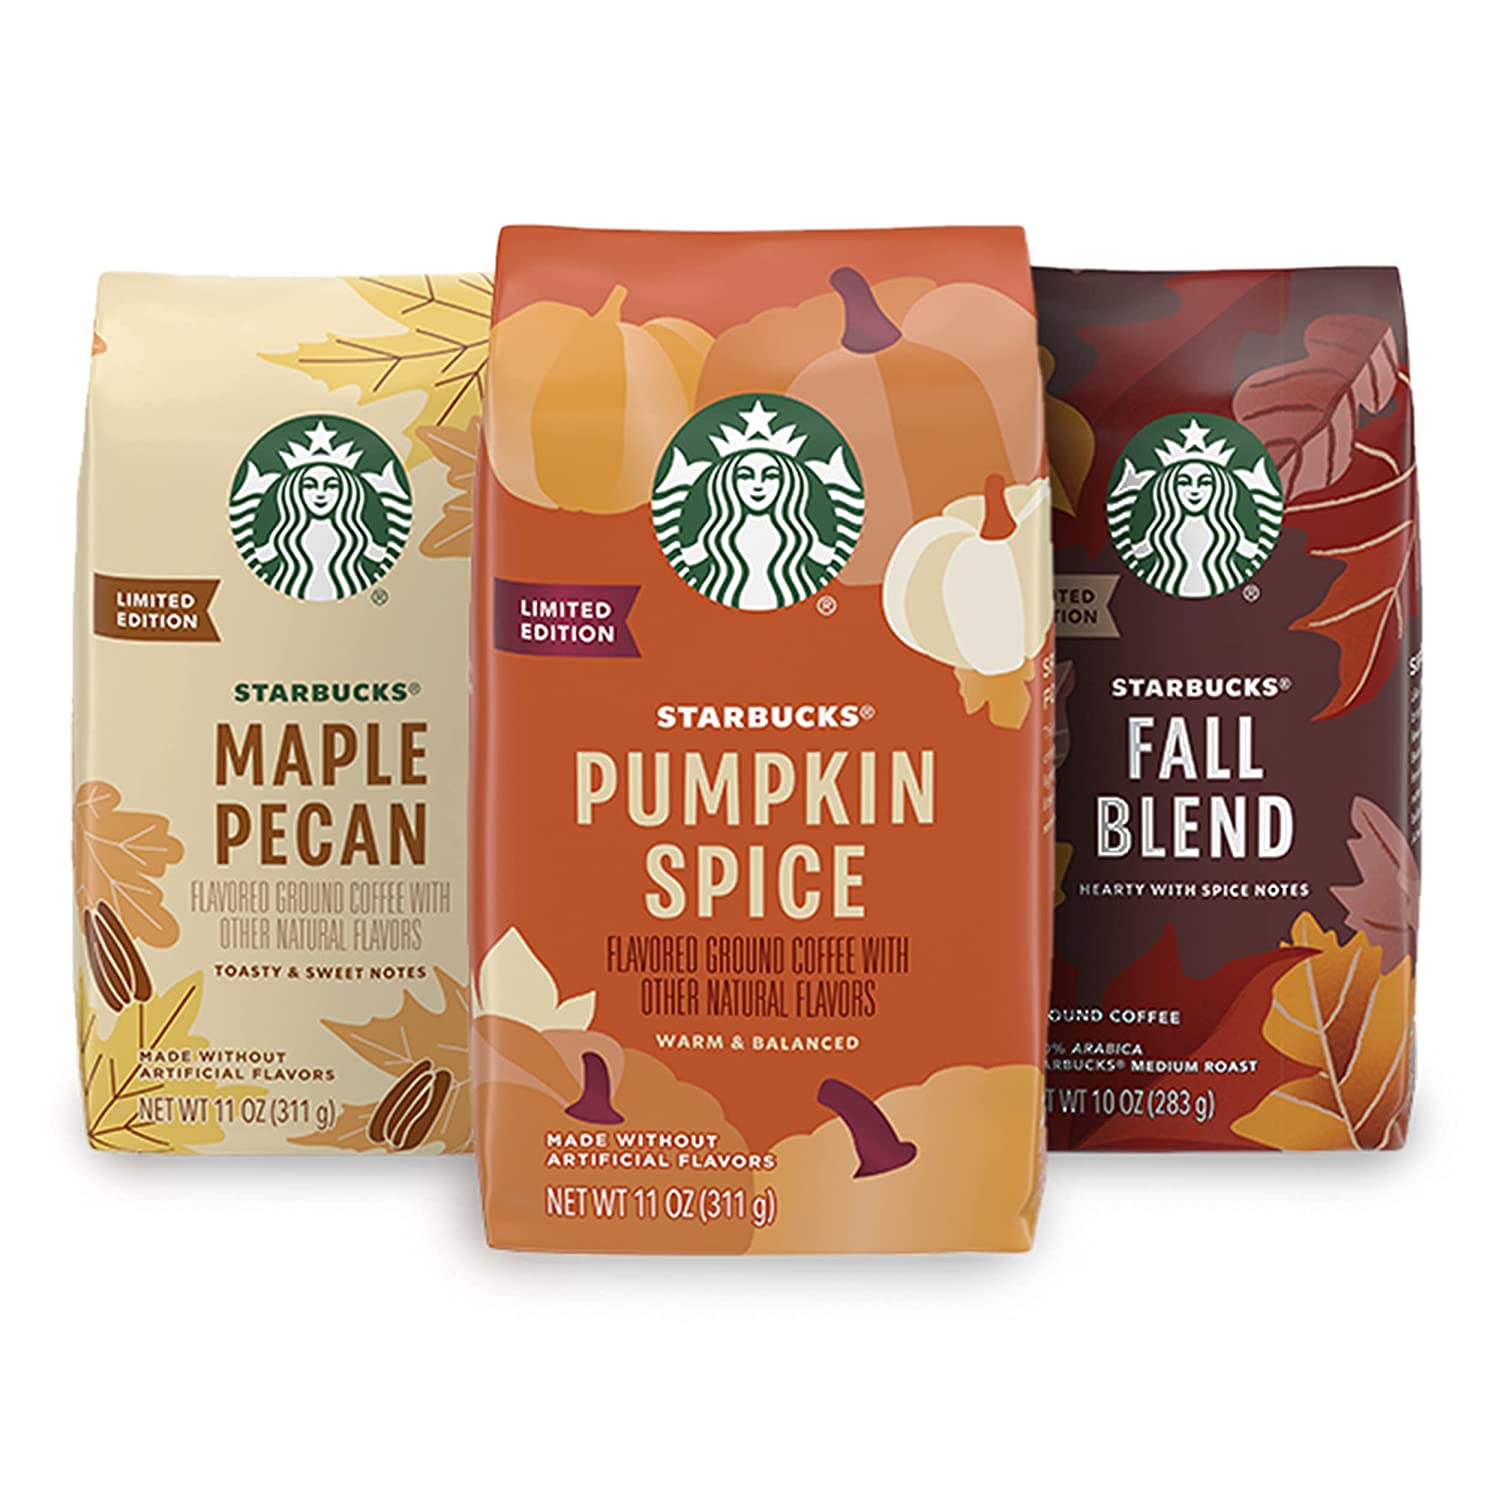 Starbucks Fall Variety pack 3 bags of flavored ground coffee : Pumpkin spice, Fall Blend, and Maple pecan - 45% off with S&S- Limited edition $14.29